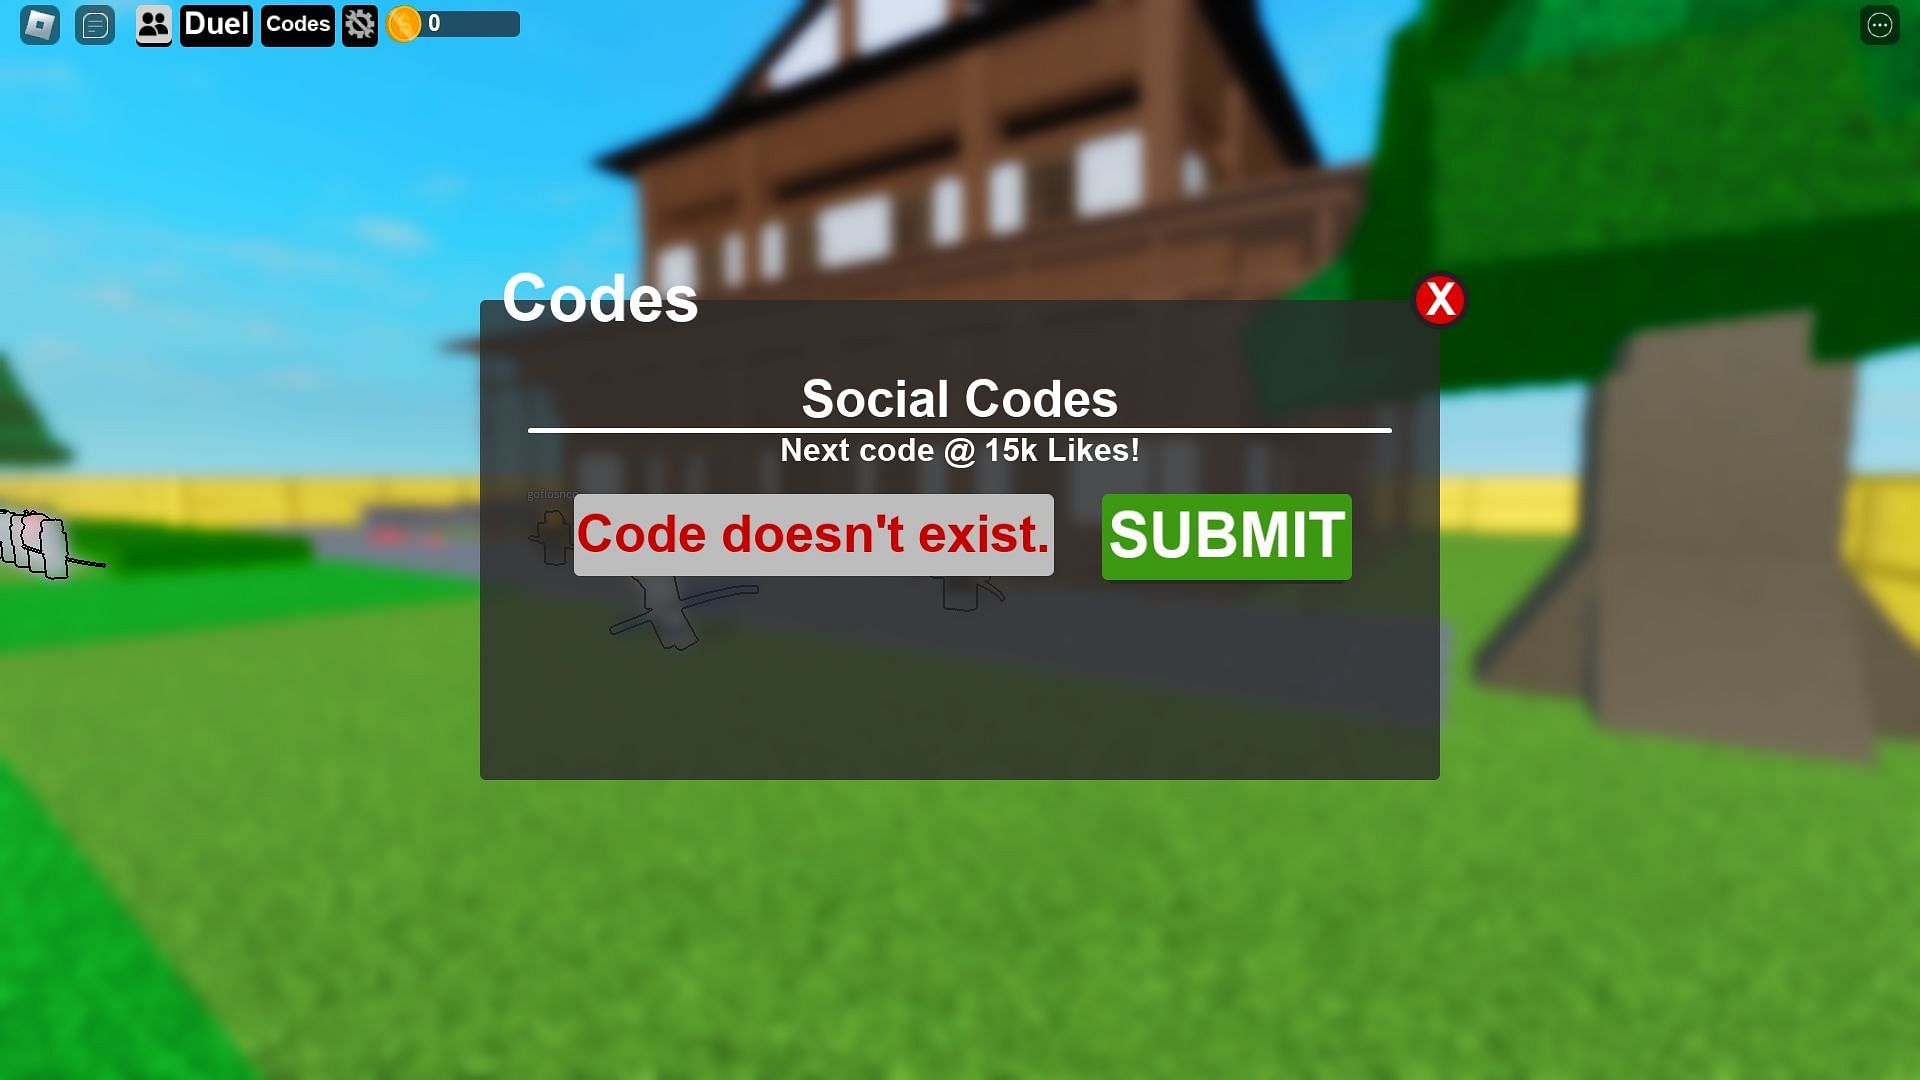 Troubleshooting codes for Slayer Arena (Image via Roblox)